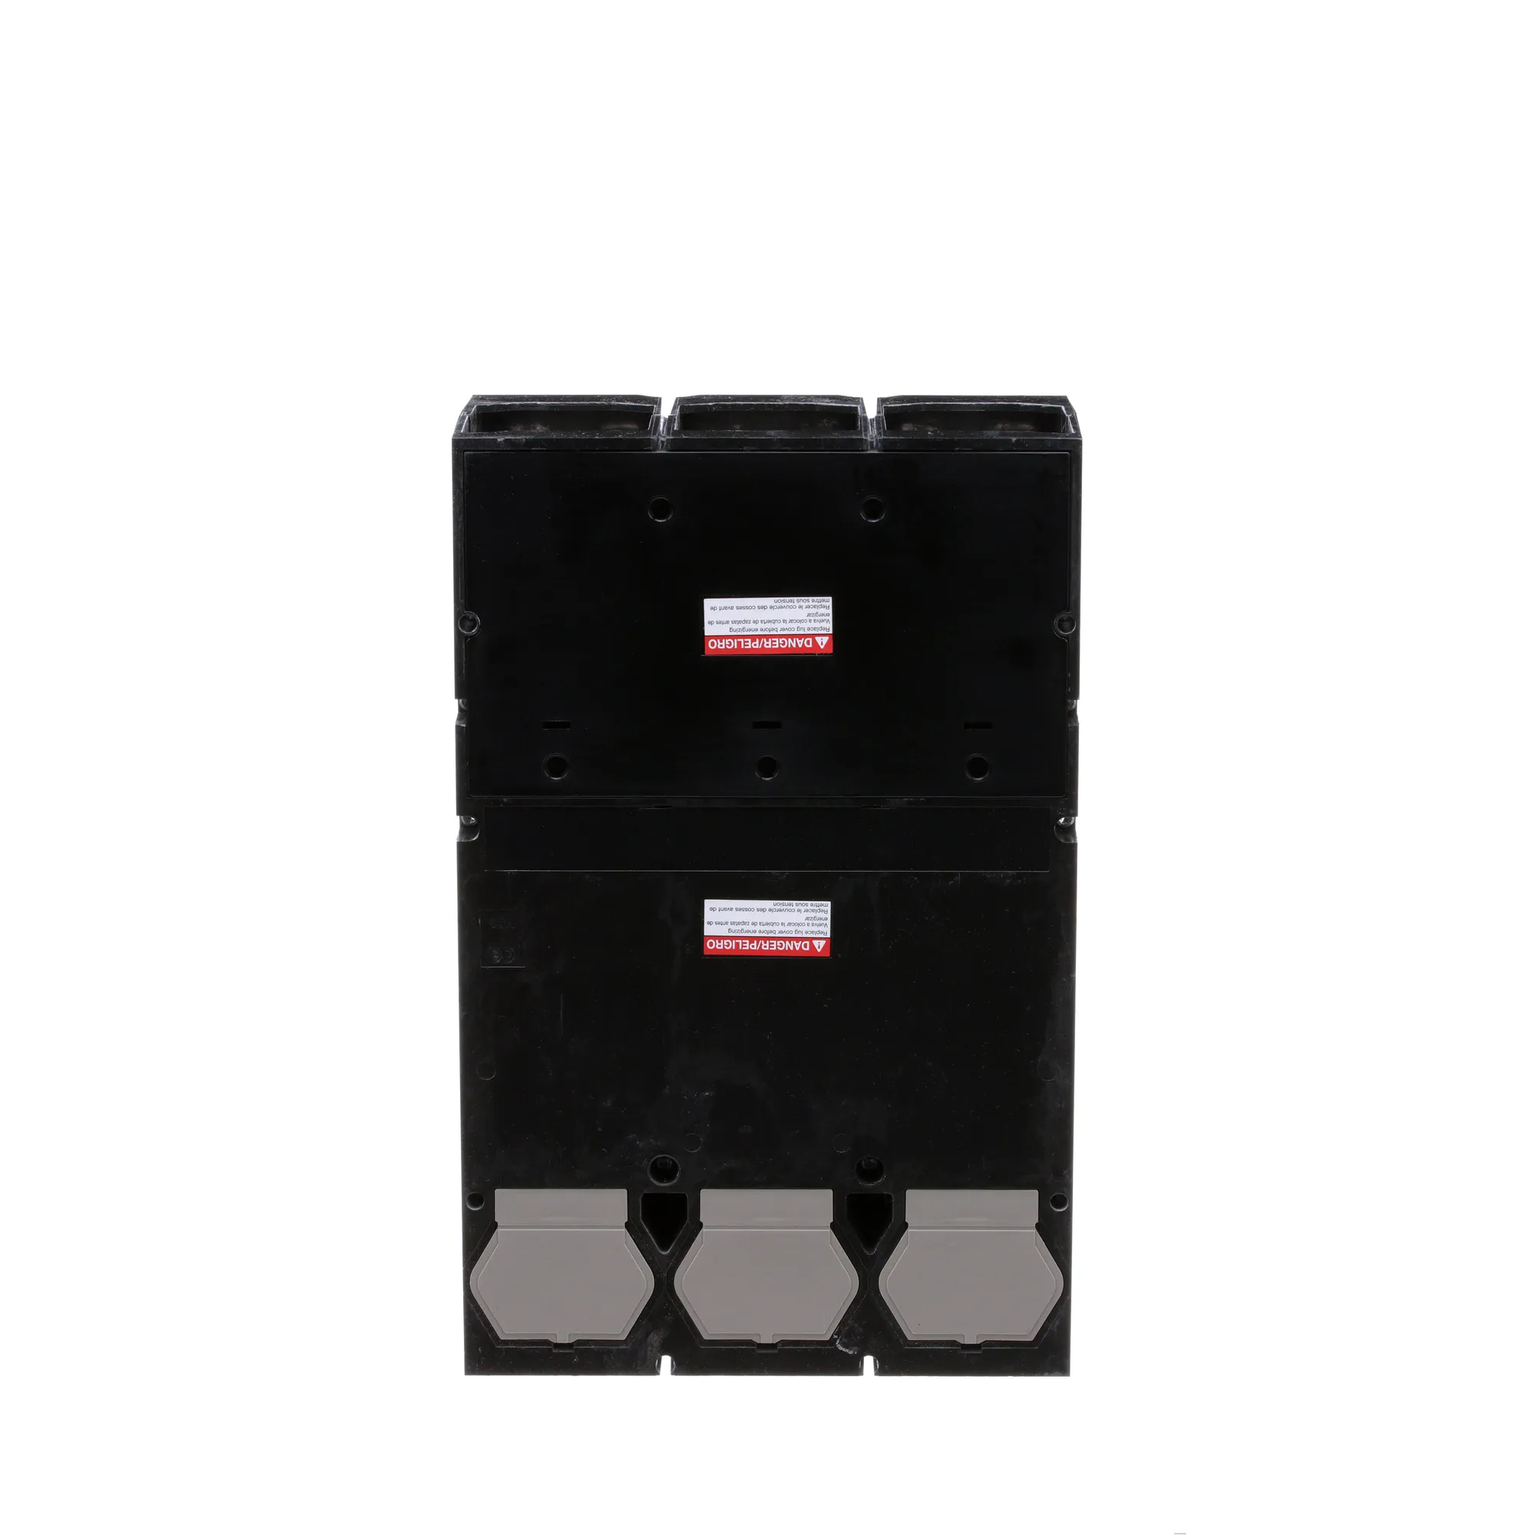 MGL36300 - Square D - Molded Case Circuit Breaker